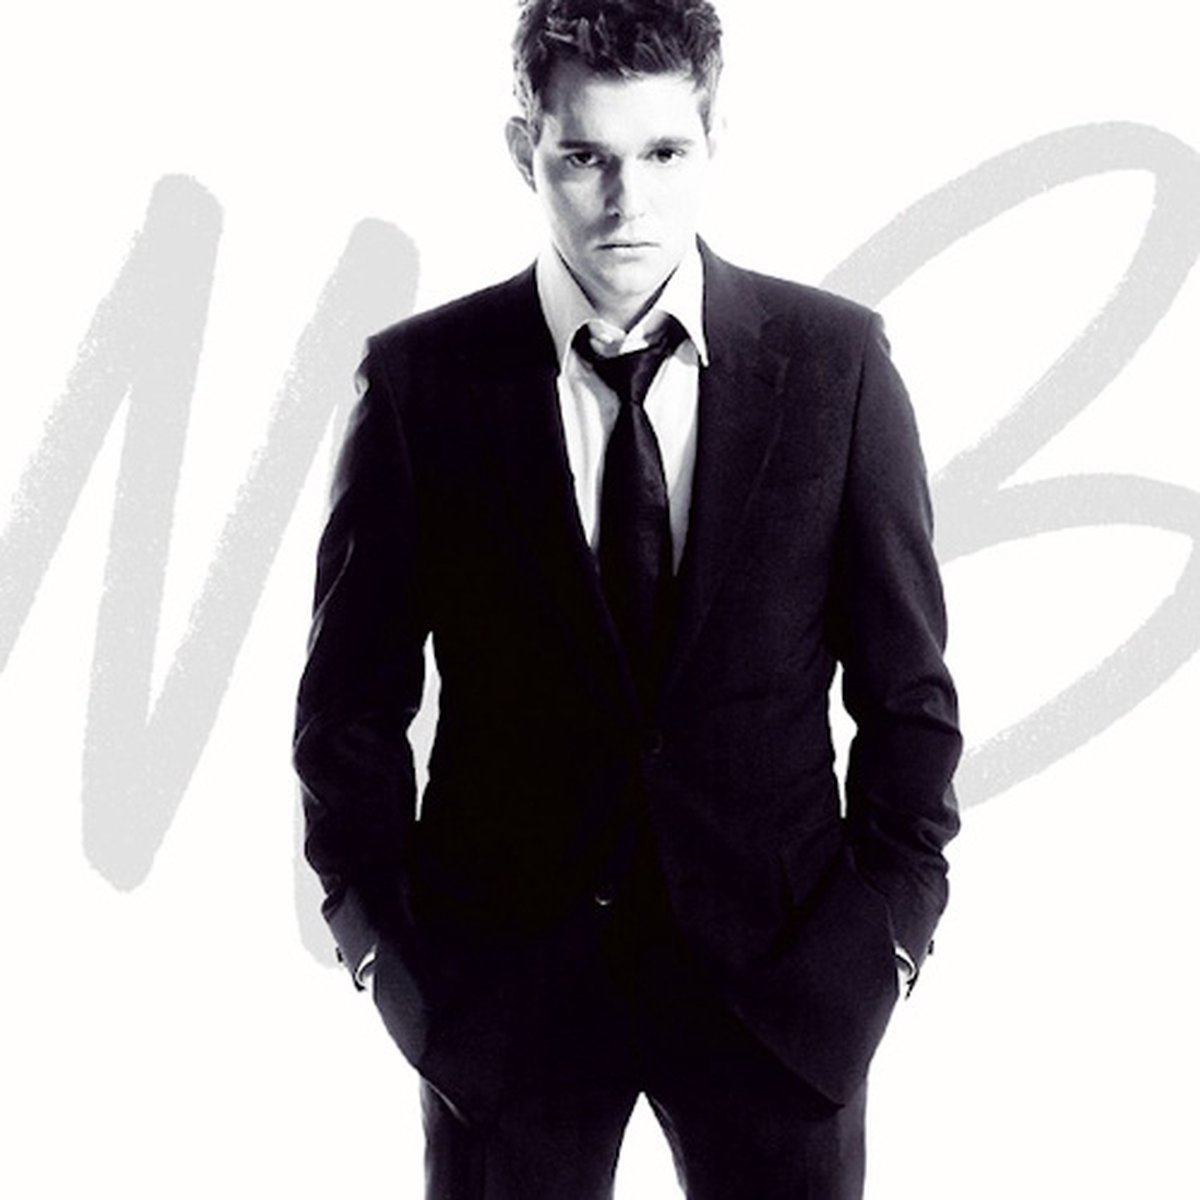 It's Time - Buble,michael